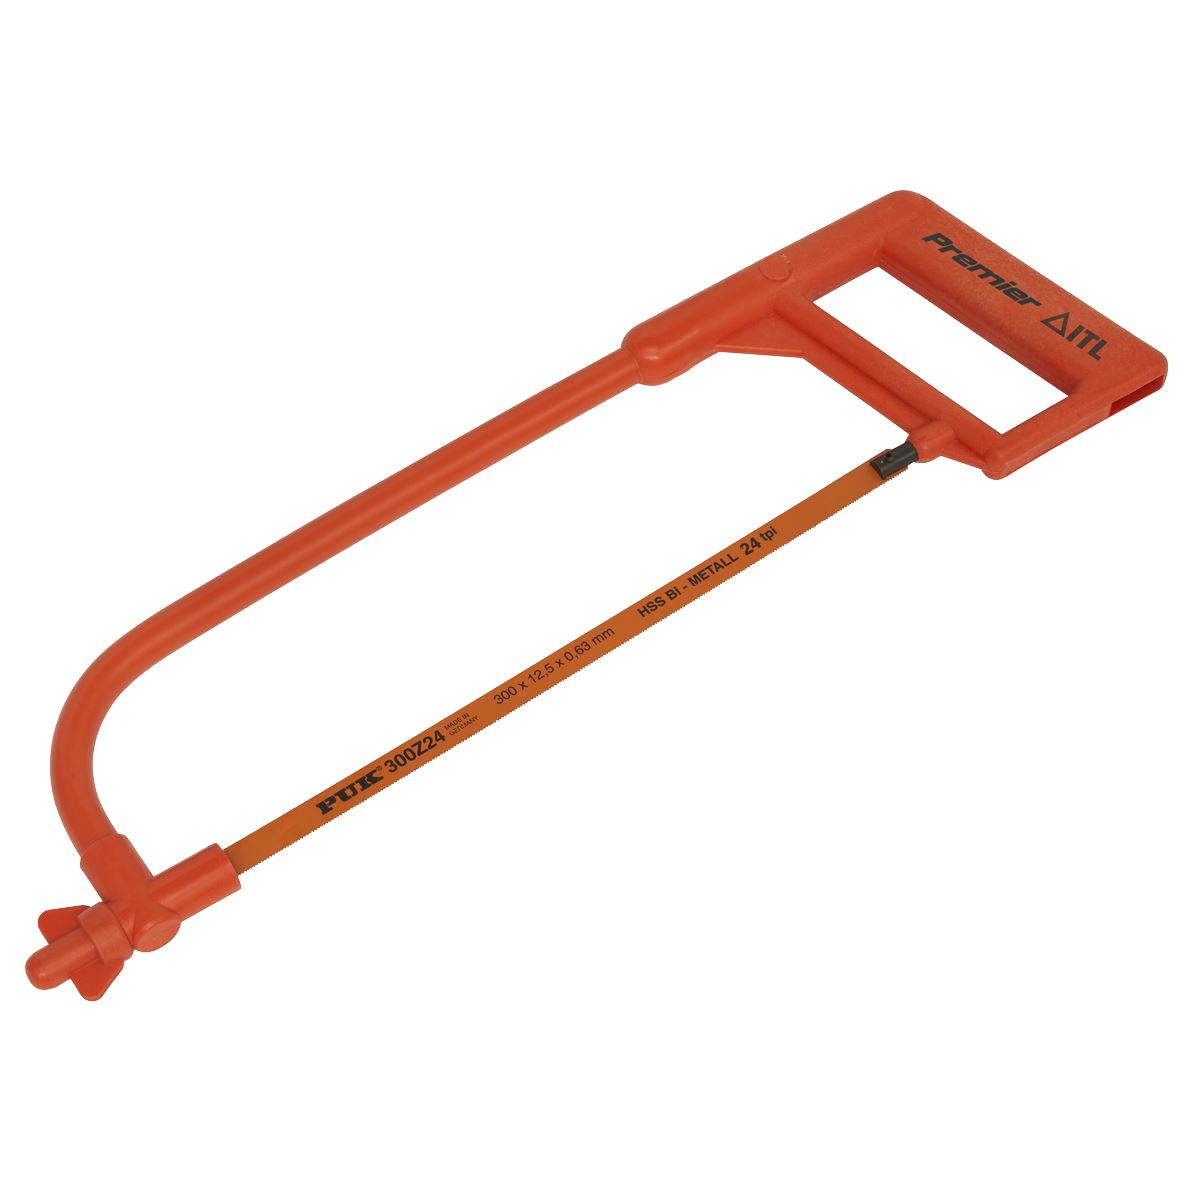 Sealey Premier Hacksaw Professional Insulated  300mm